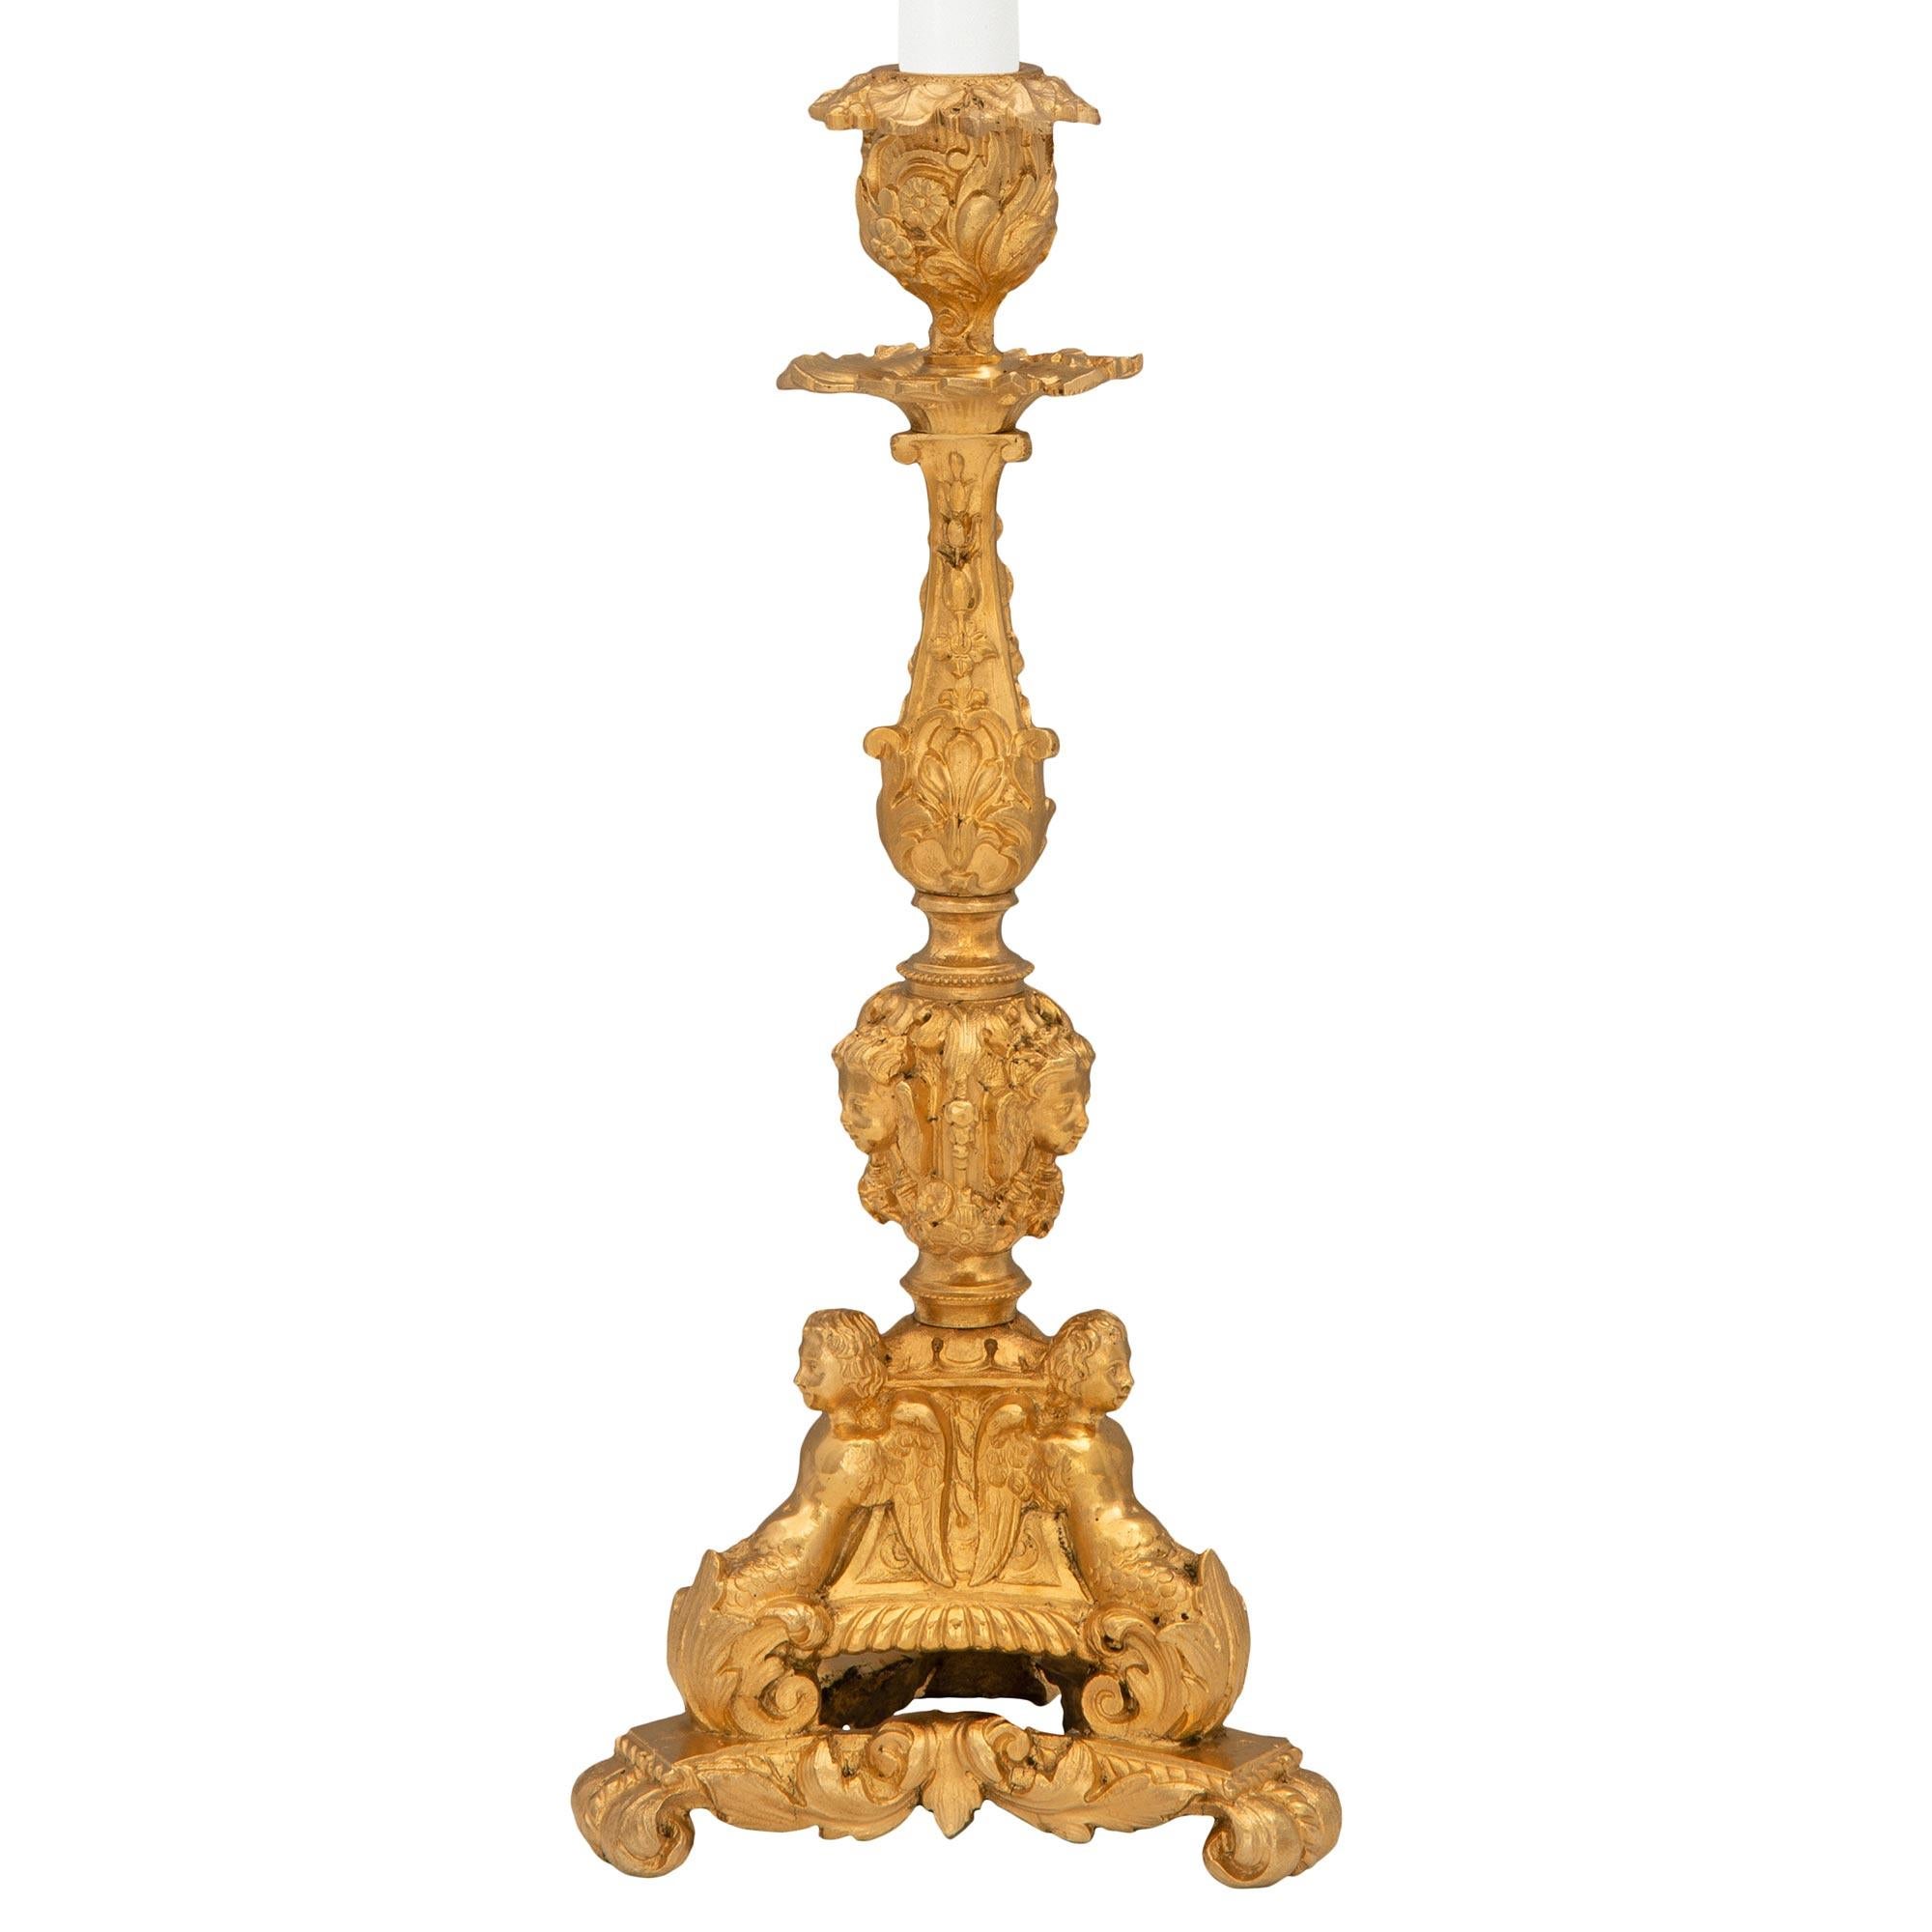 An exceptional pair of French 19th century Renaissance st. ormolu candlesticks. Each candlestick is raised by an elegant and most decorative triangular base with lavish scrolled foliate designs and three richly chased personages below beautiful